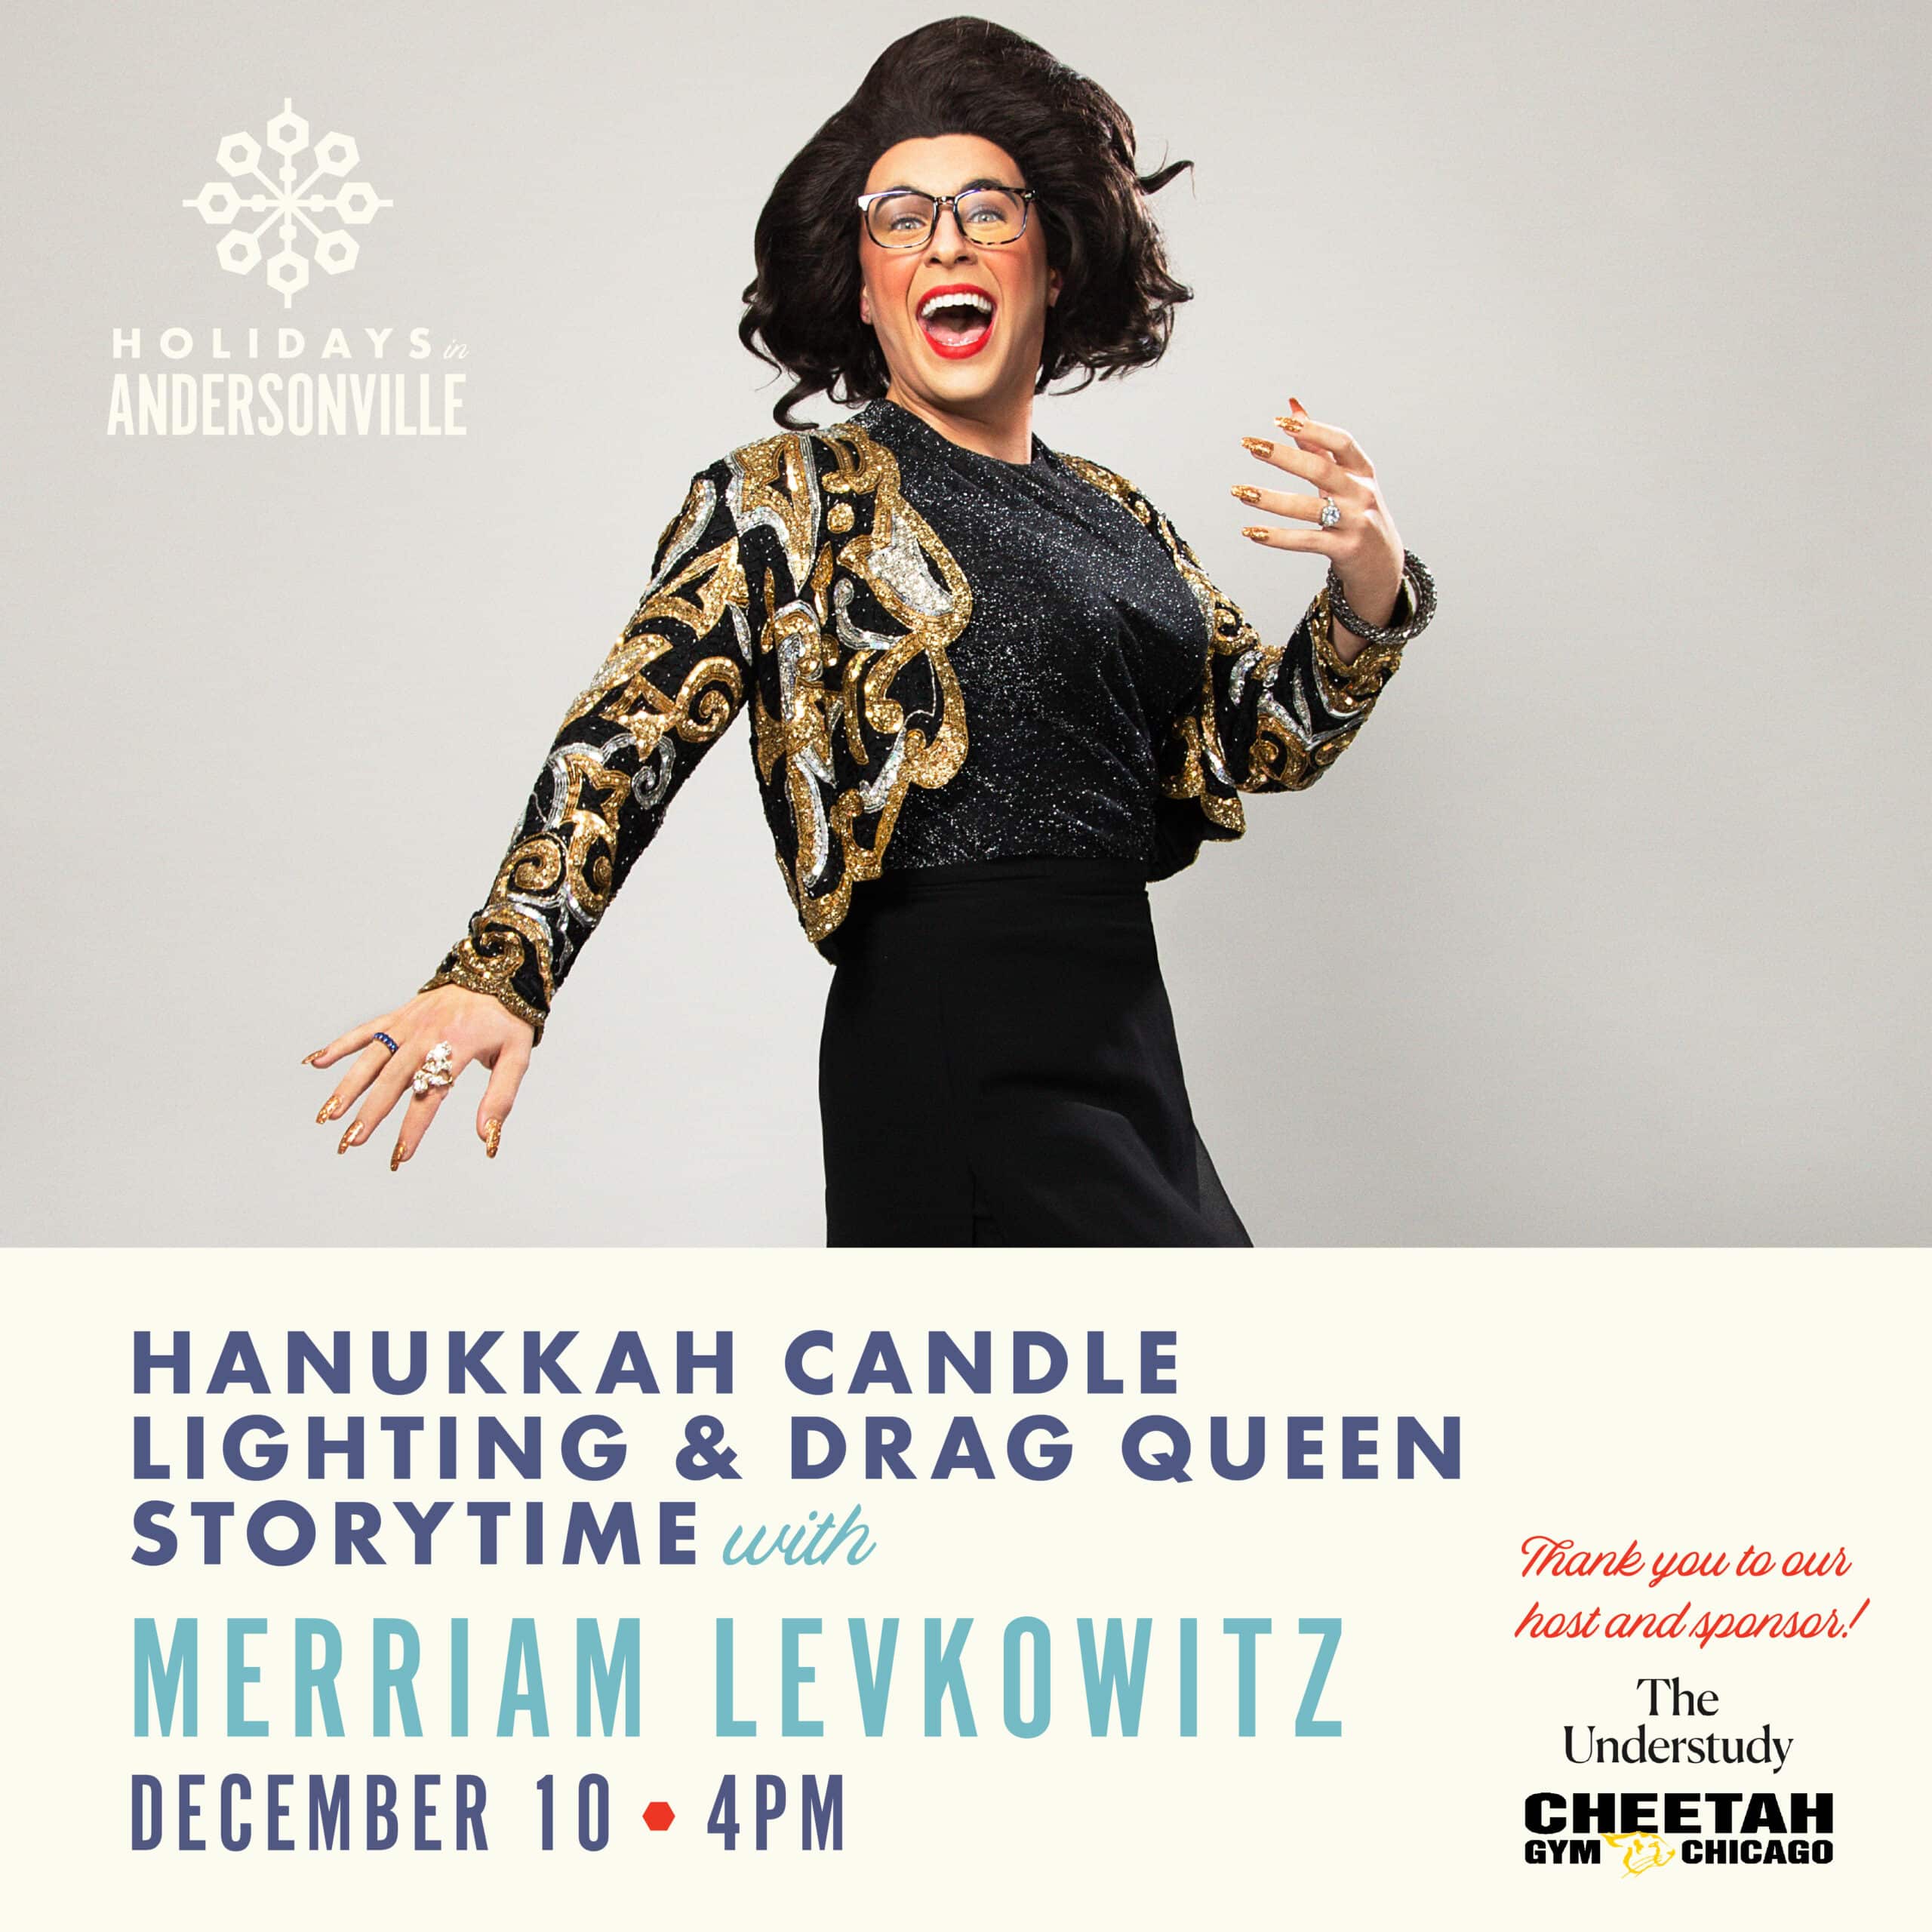 Hanukkah Candle Lighting and Drag Queen Story Time